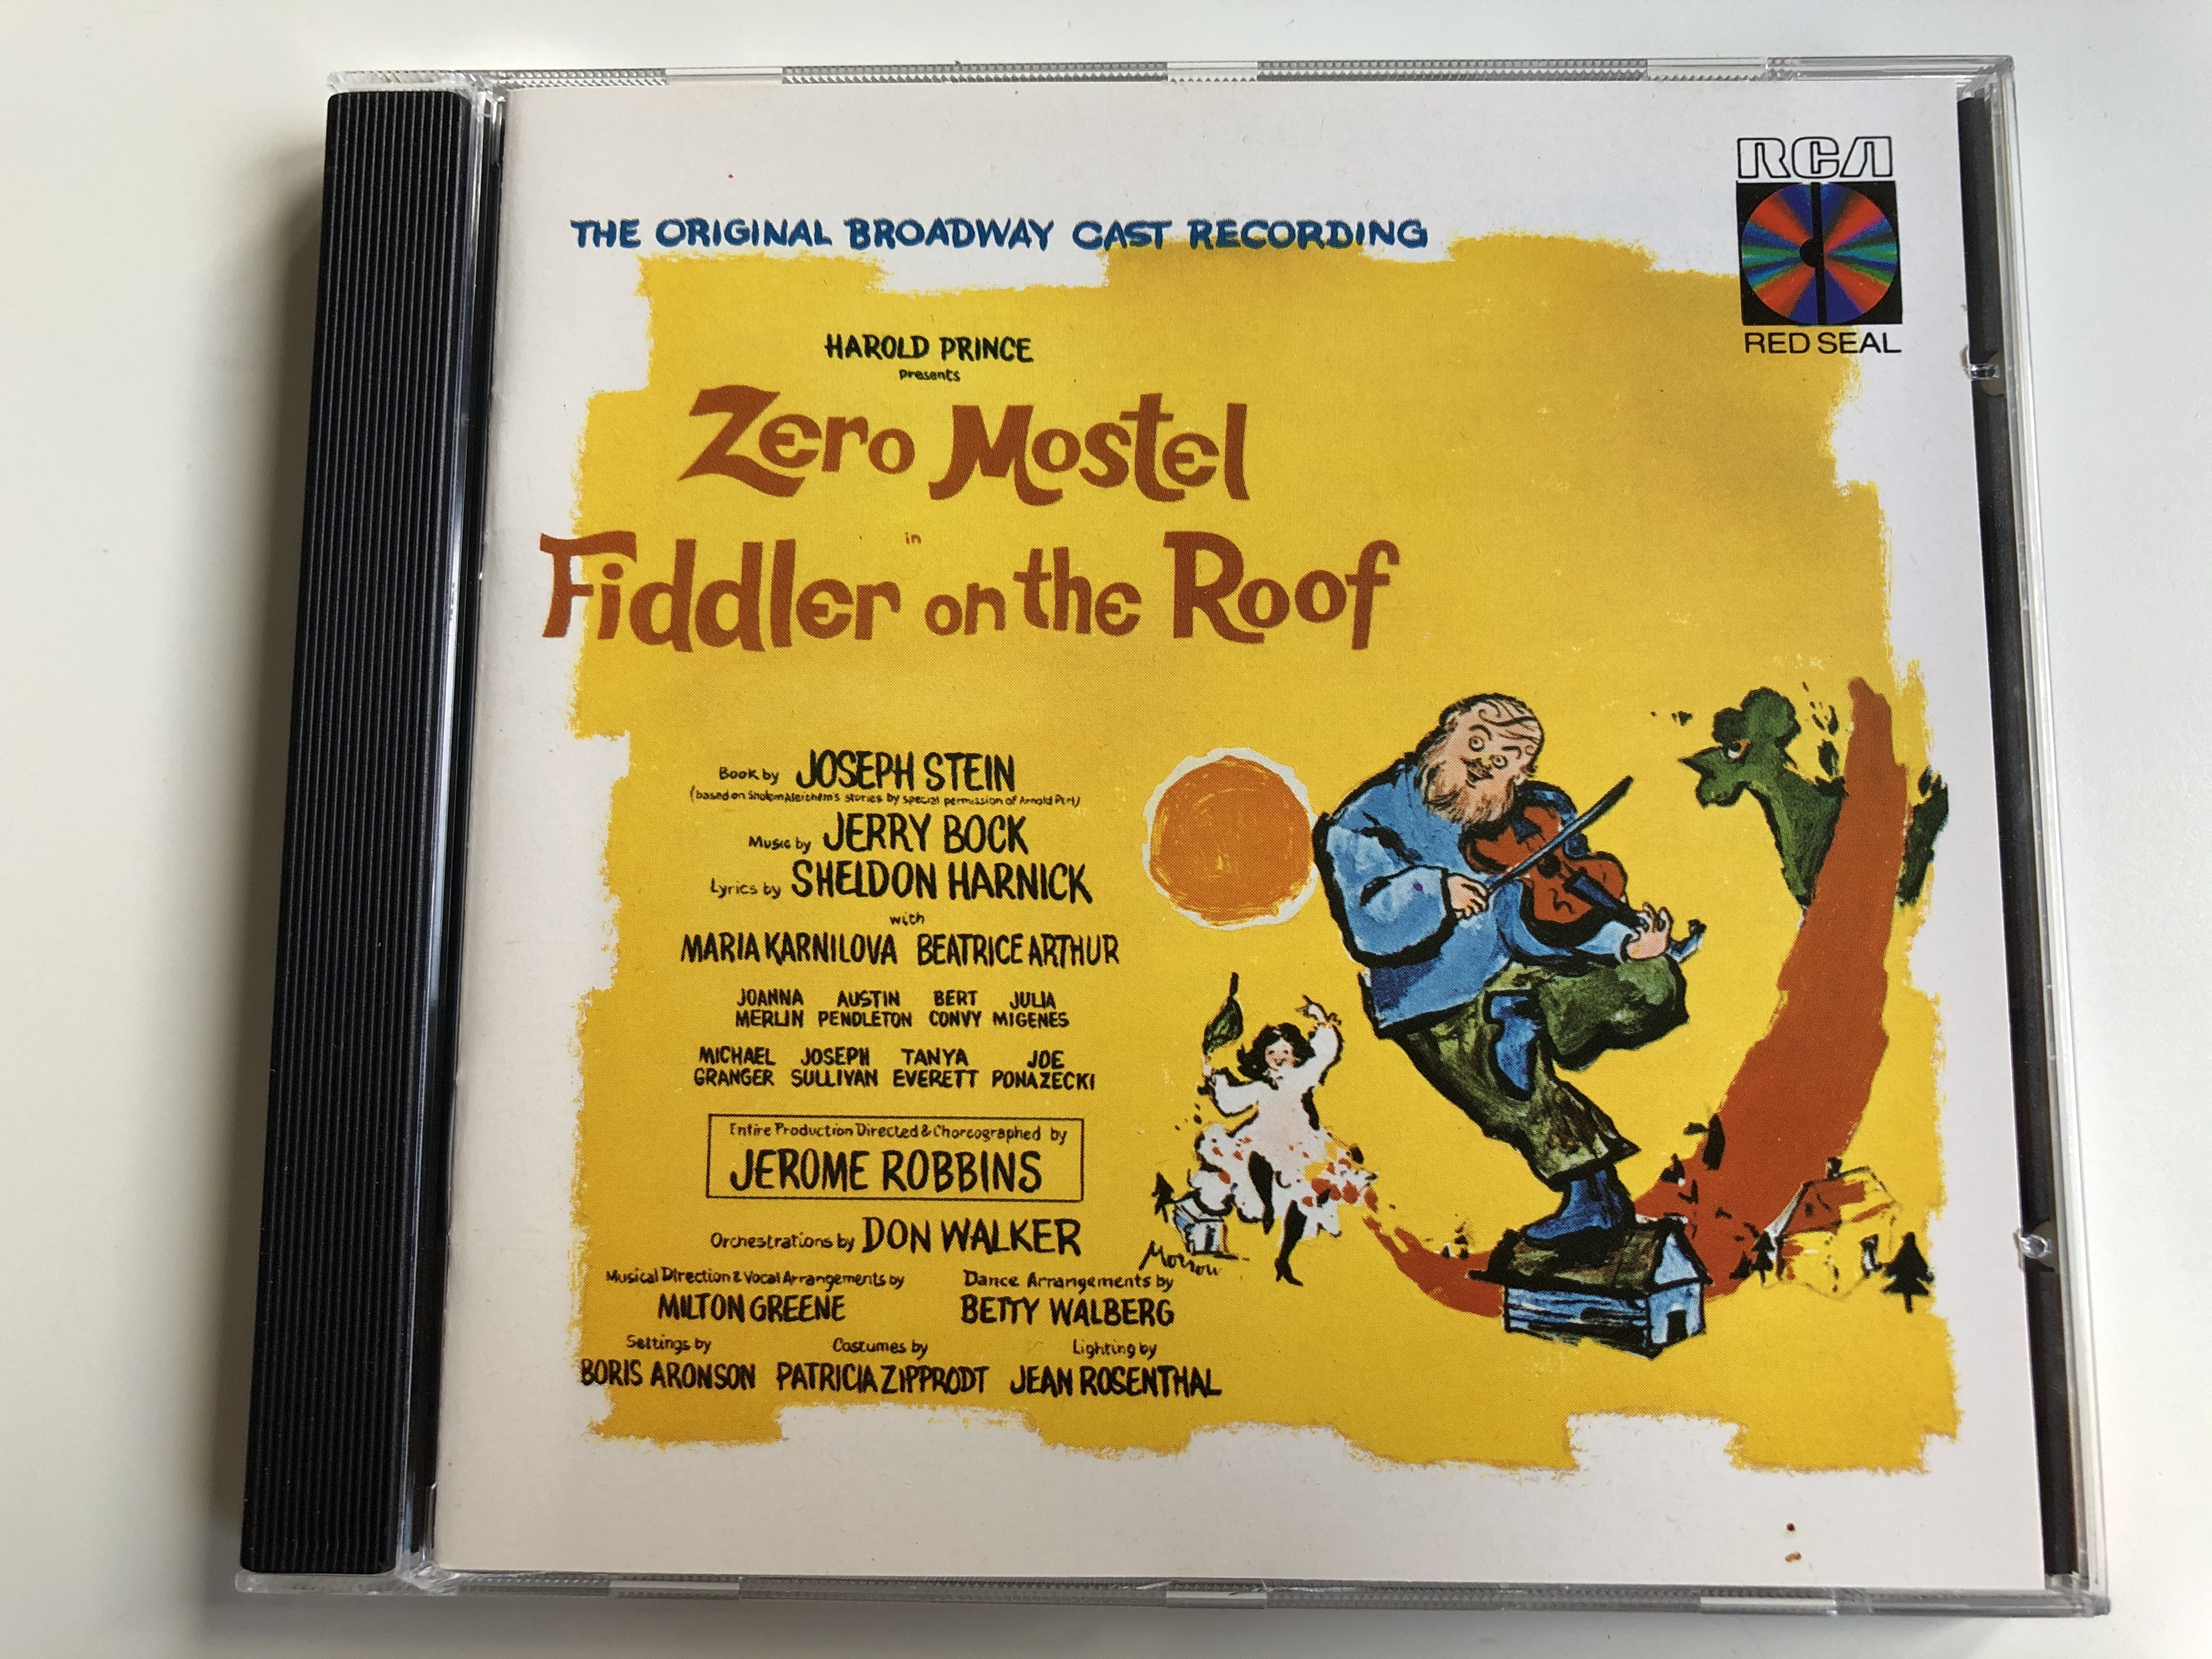 the-original-broadway-cast-recording-harold-prince-presents-zero-mostel-fiddler-on-the-roof-rca-victor-red-seal-audio-cd-rd87060-1-.jpg